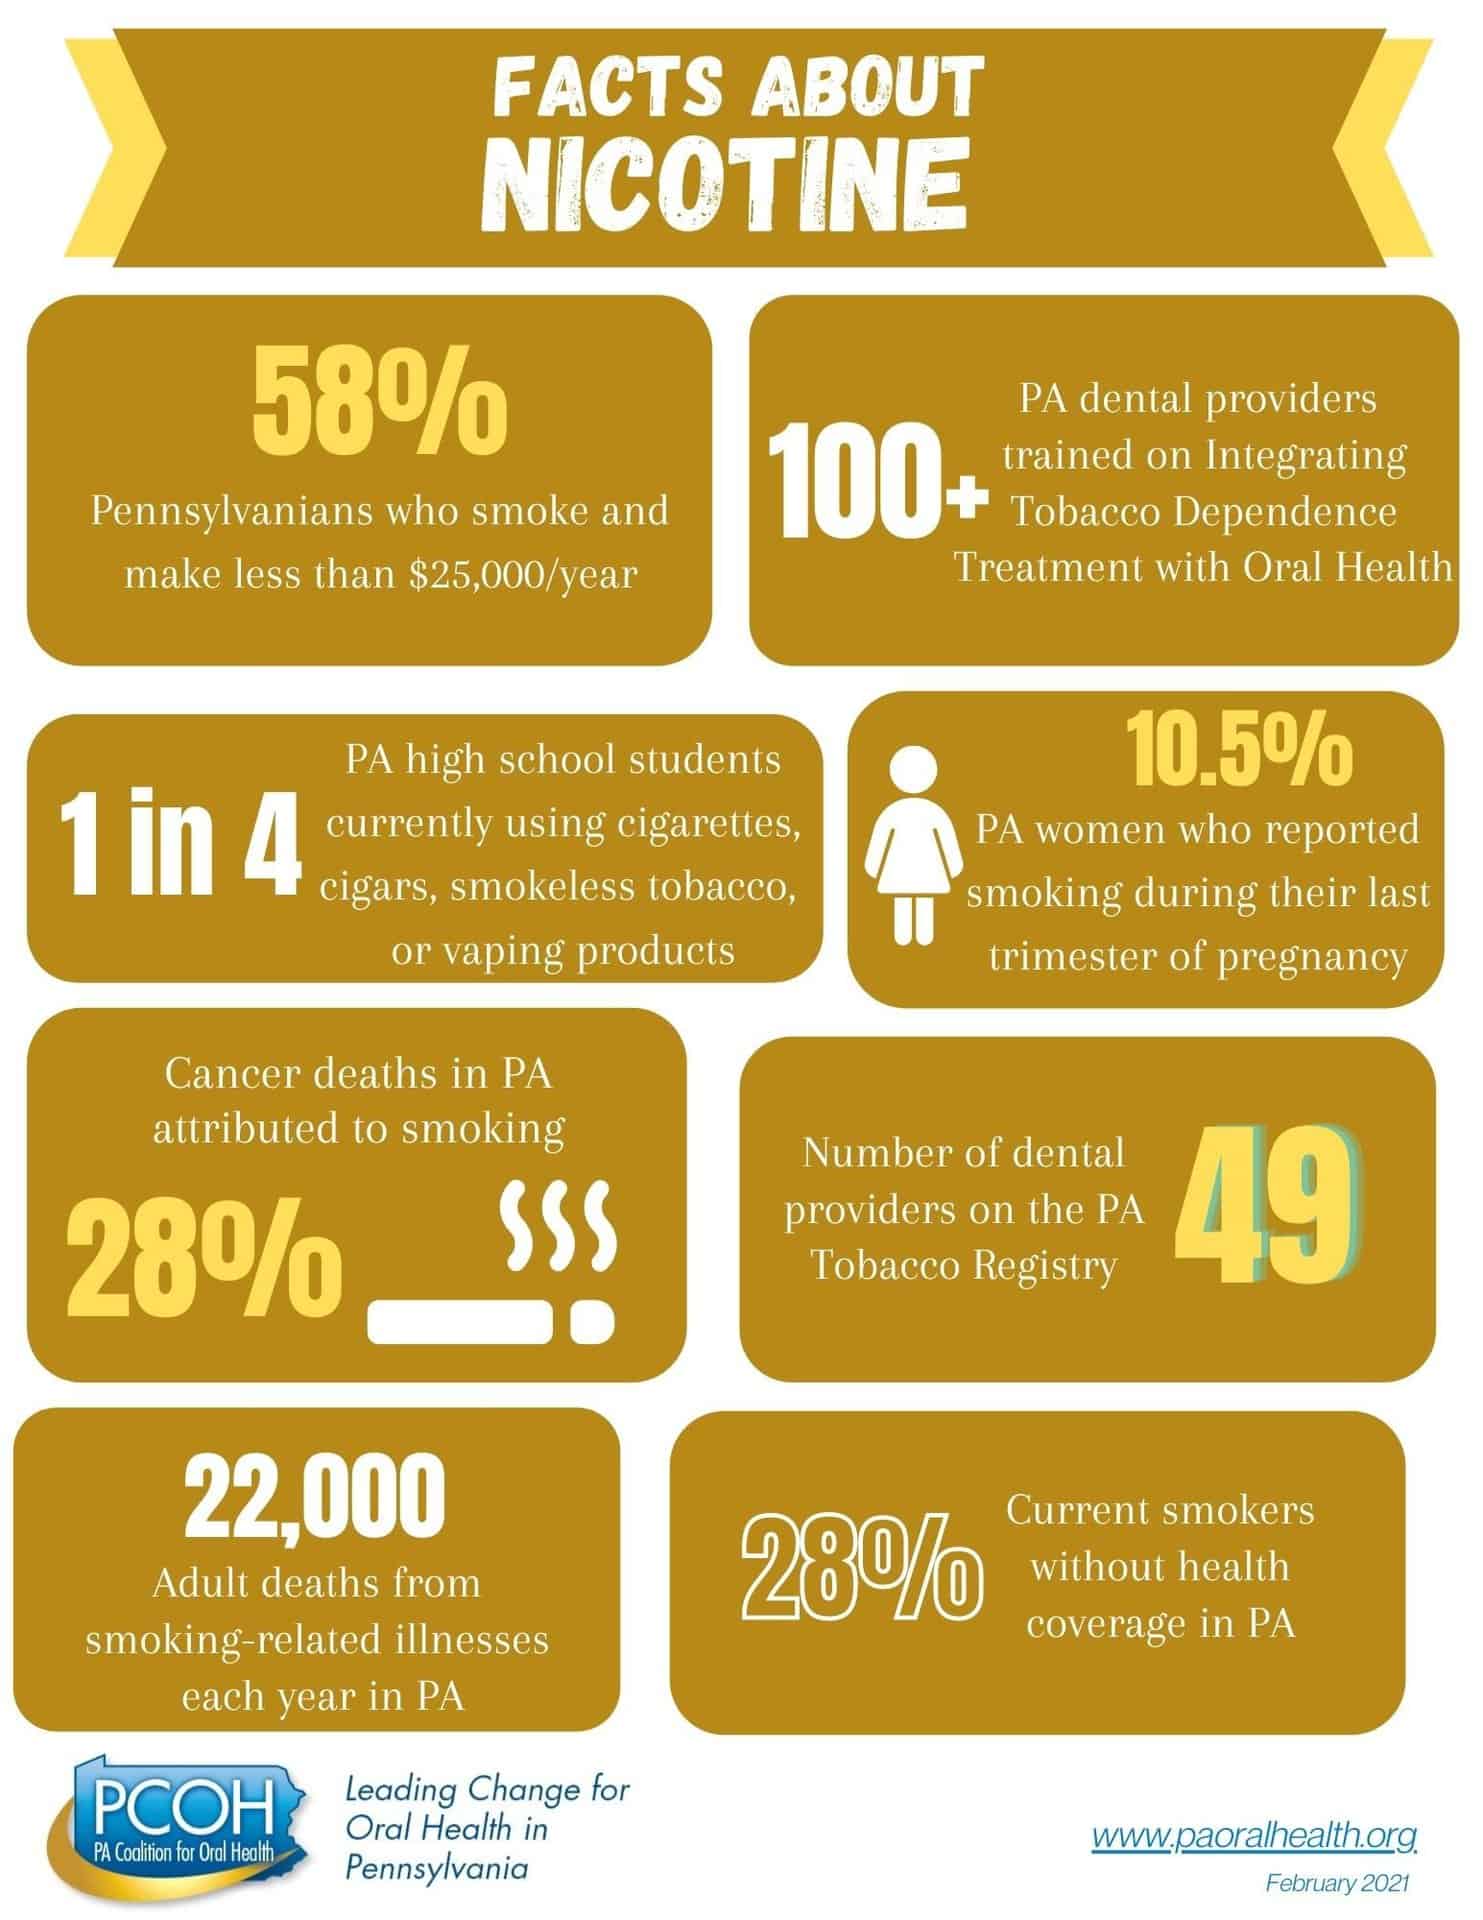 Facts About Nicotine